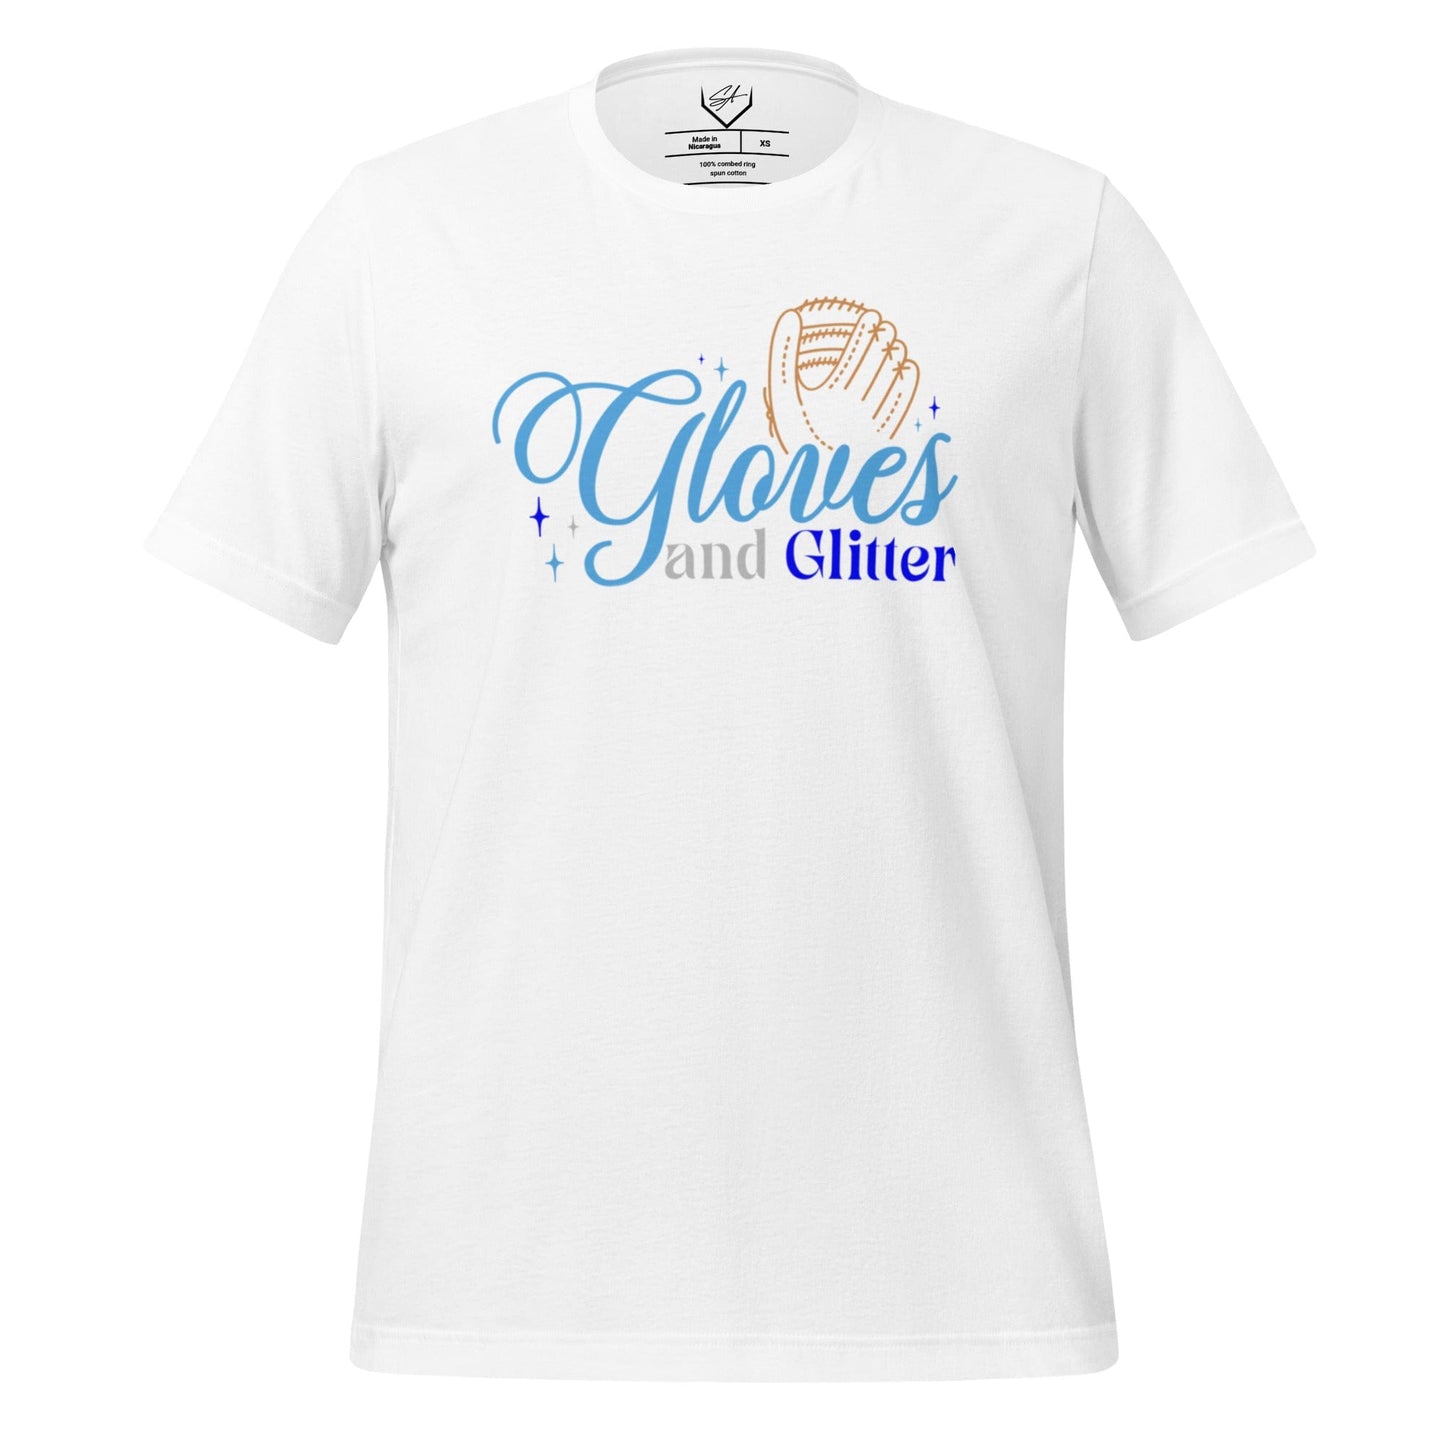 Gloves And Glitter Blue - Adult Tee